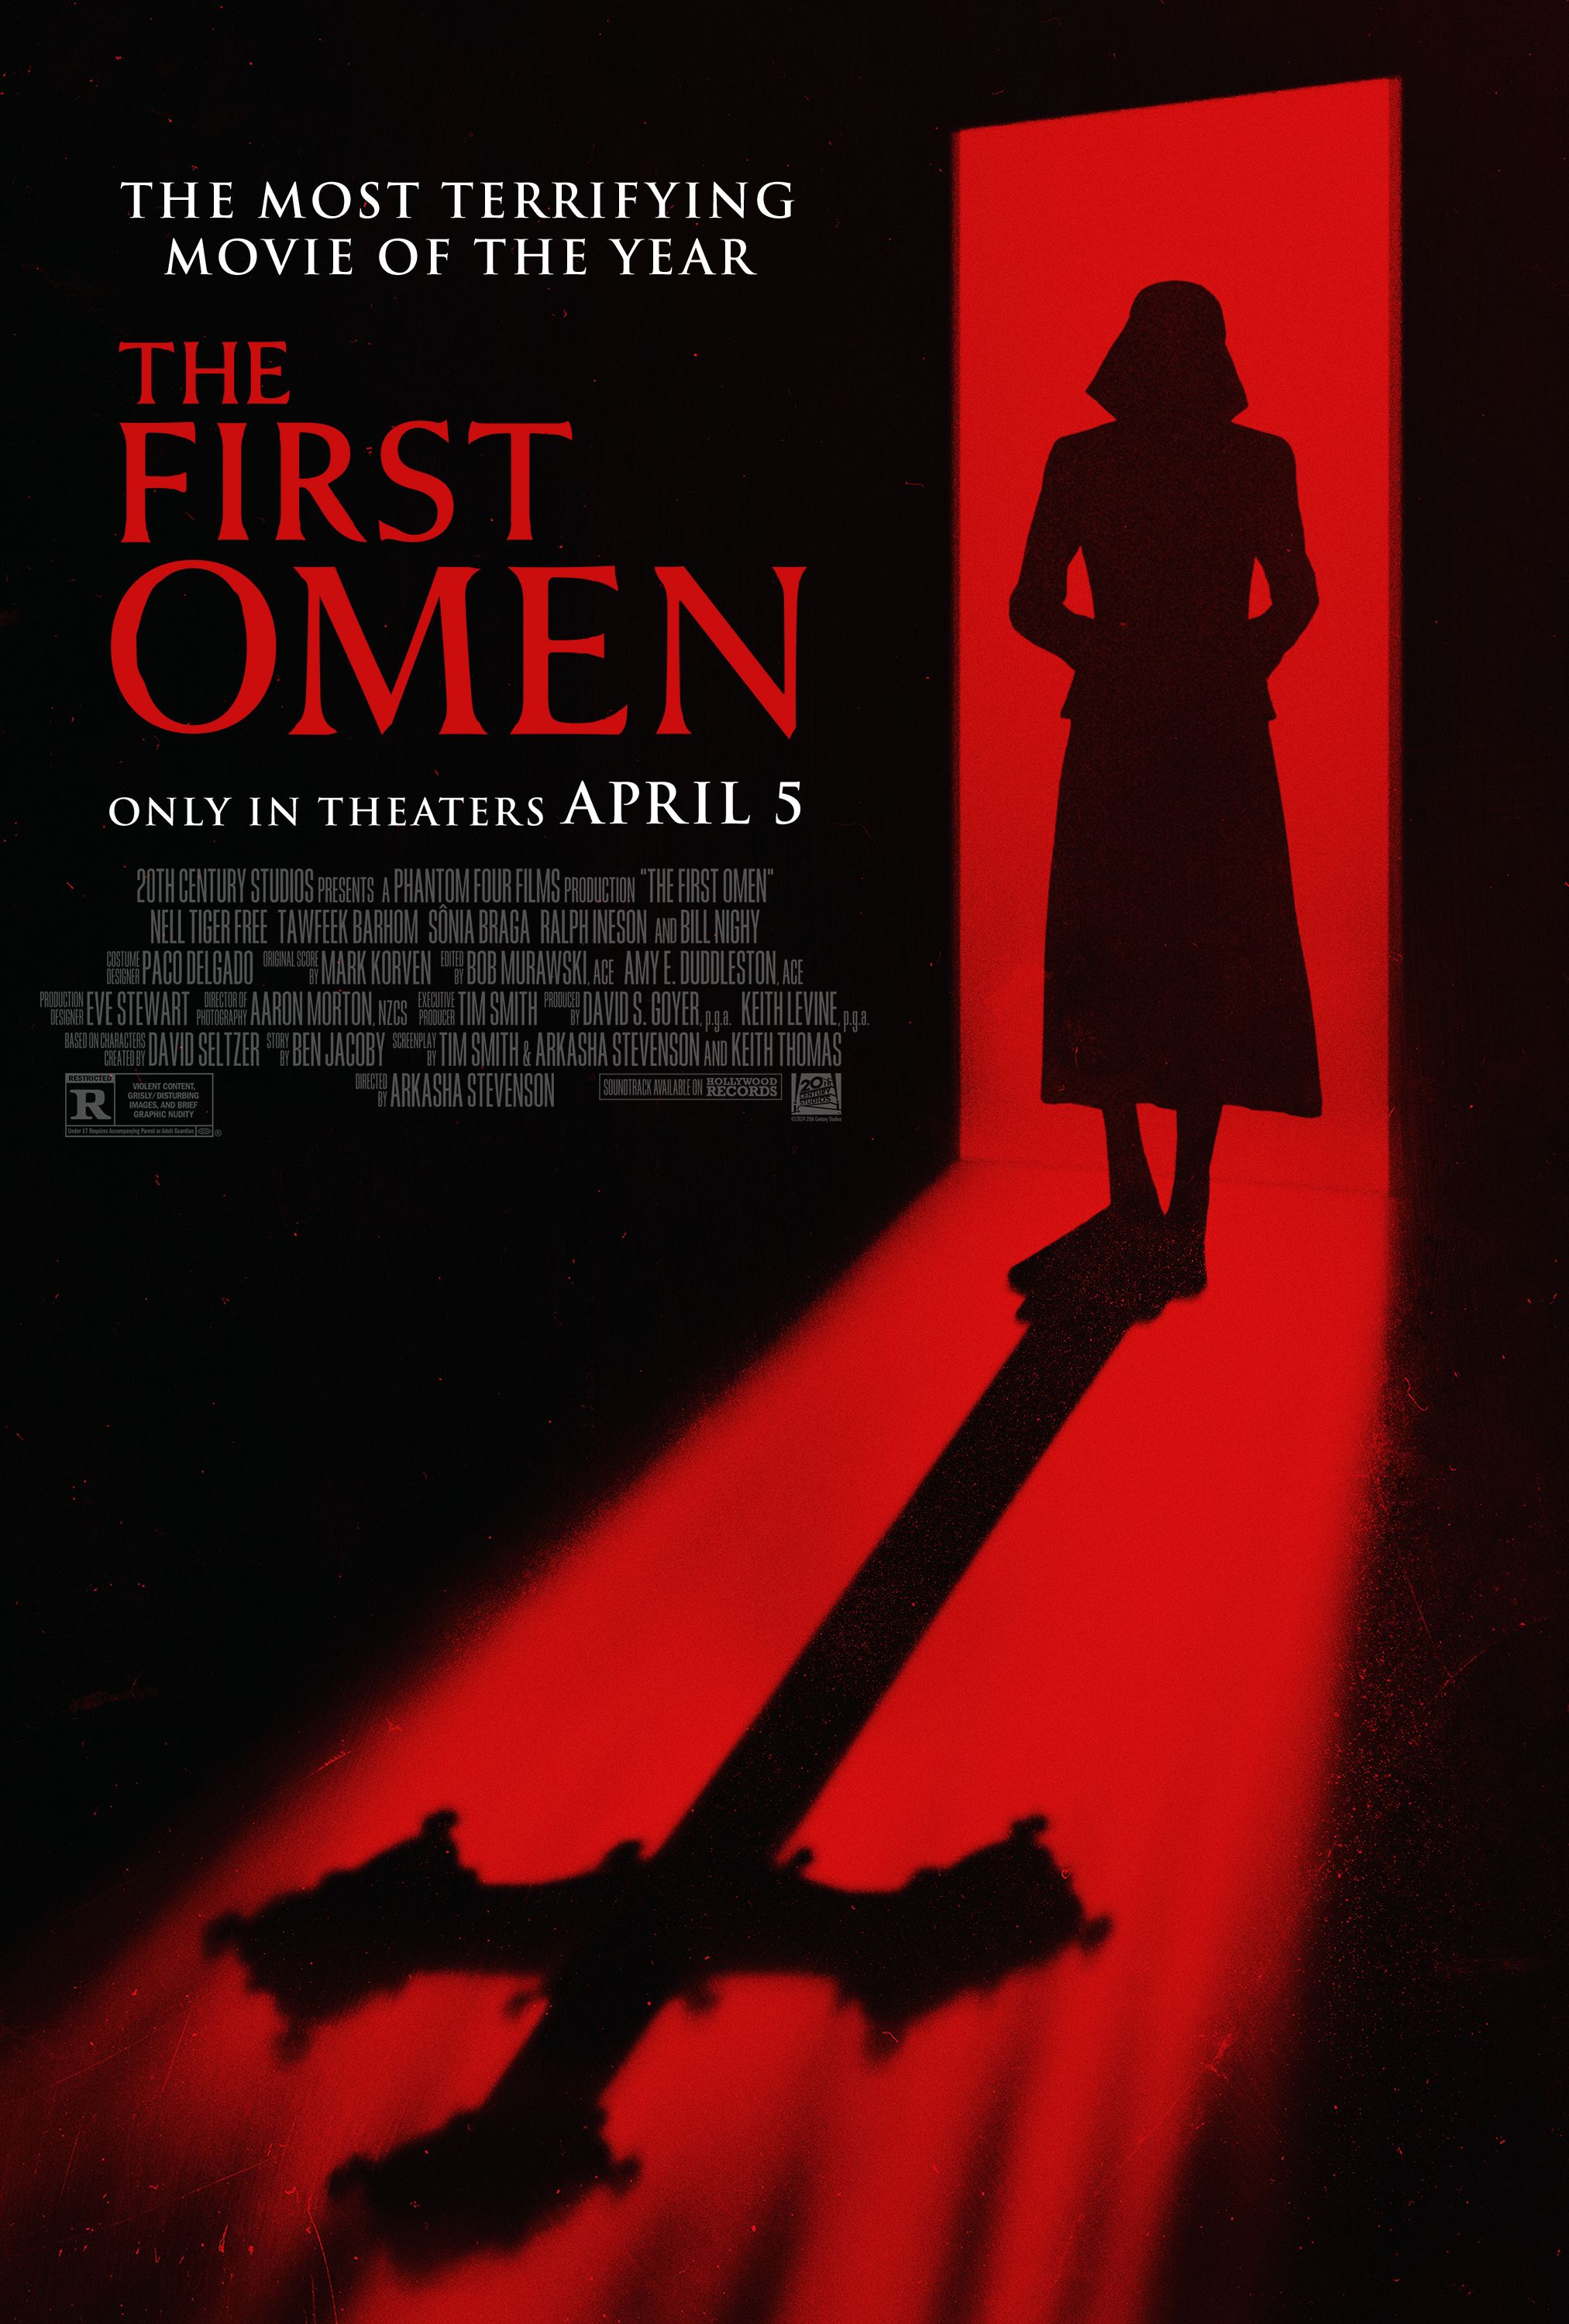 ‘The First Omen’ Global Box Office Beheads the Competition in Debut Weekend